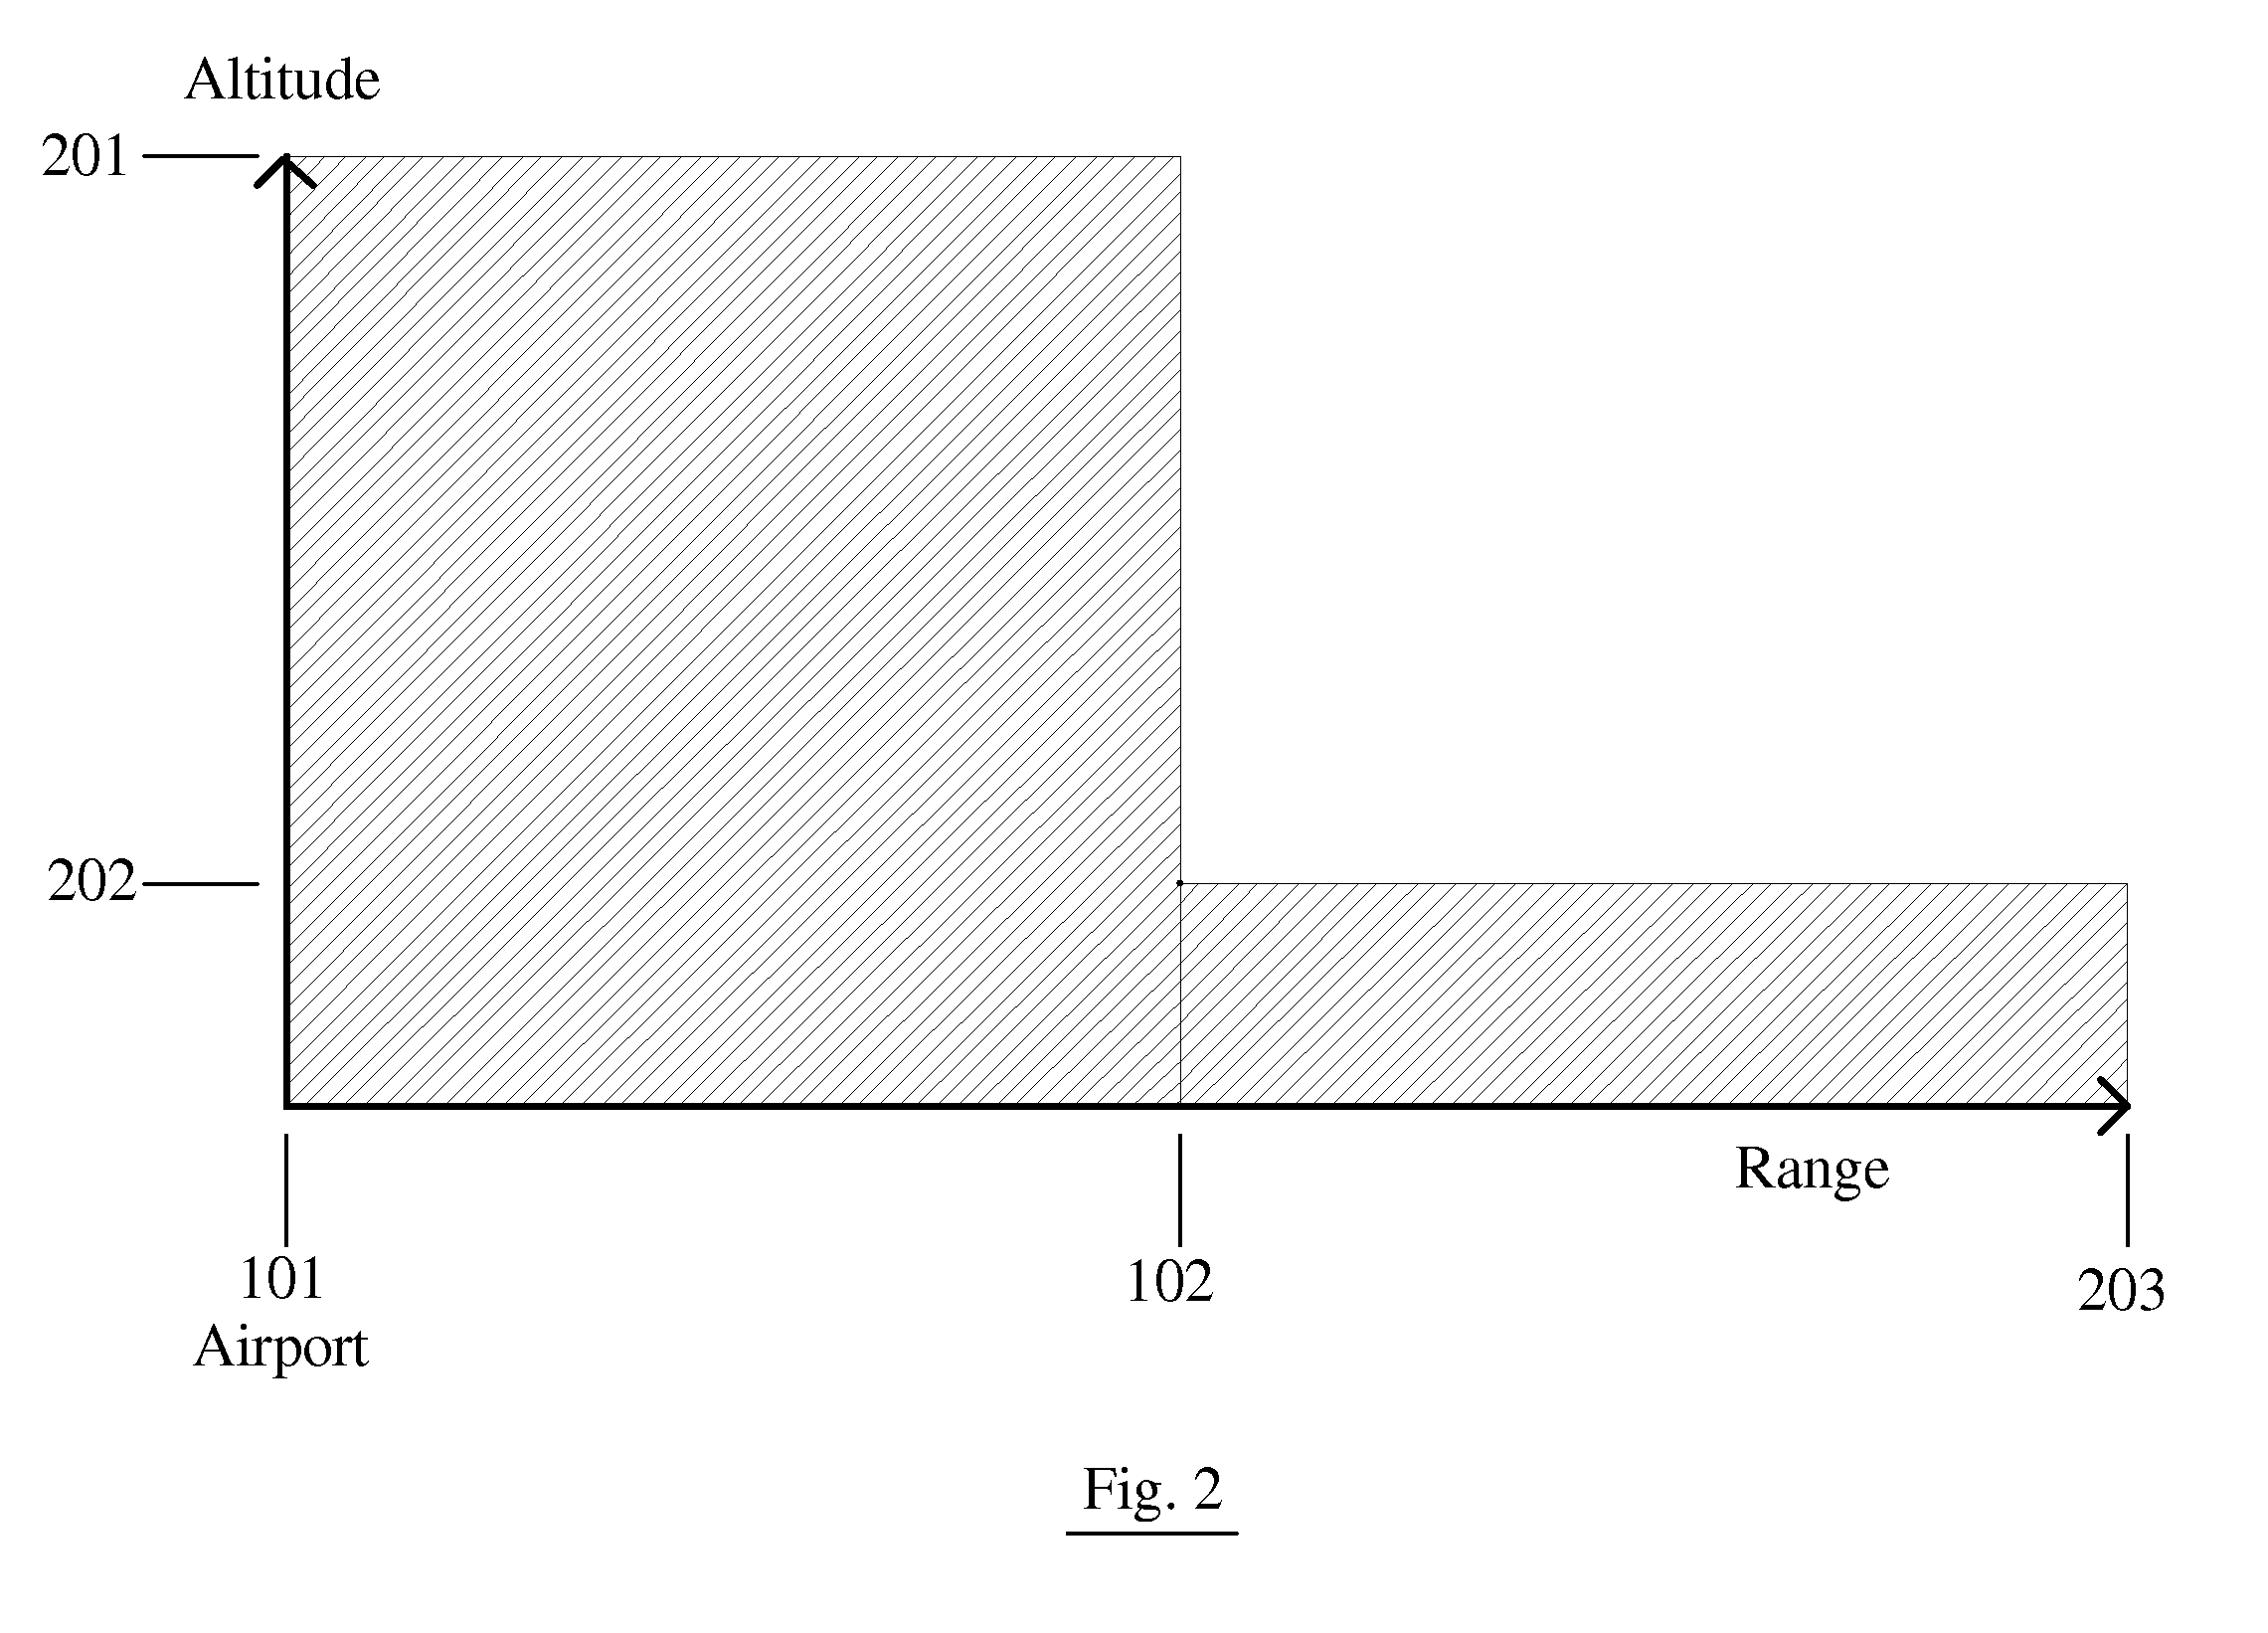 System and method for safely flying unmanned aerial vehicles in civilian airspace